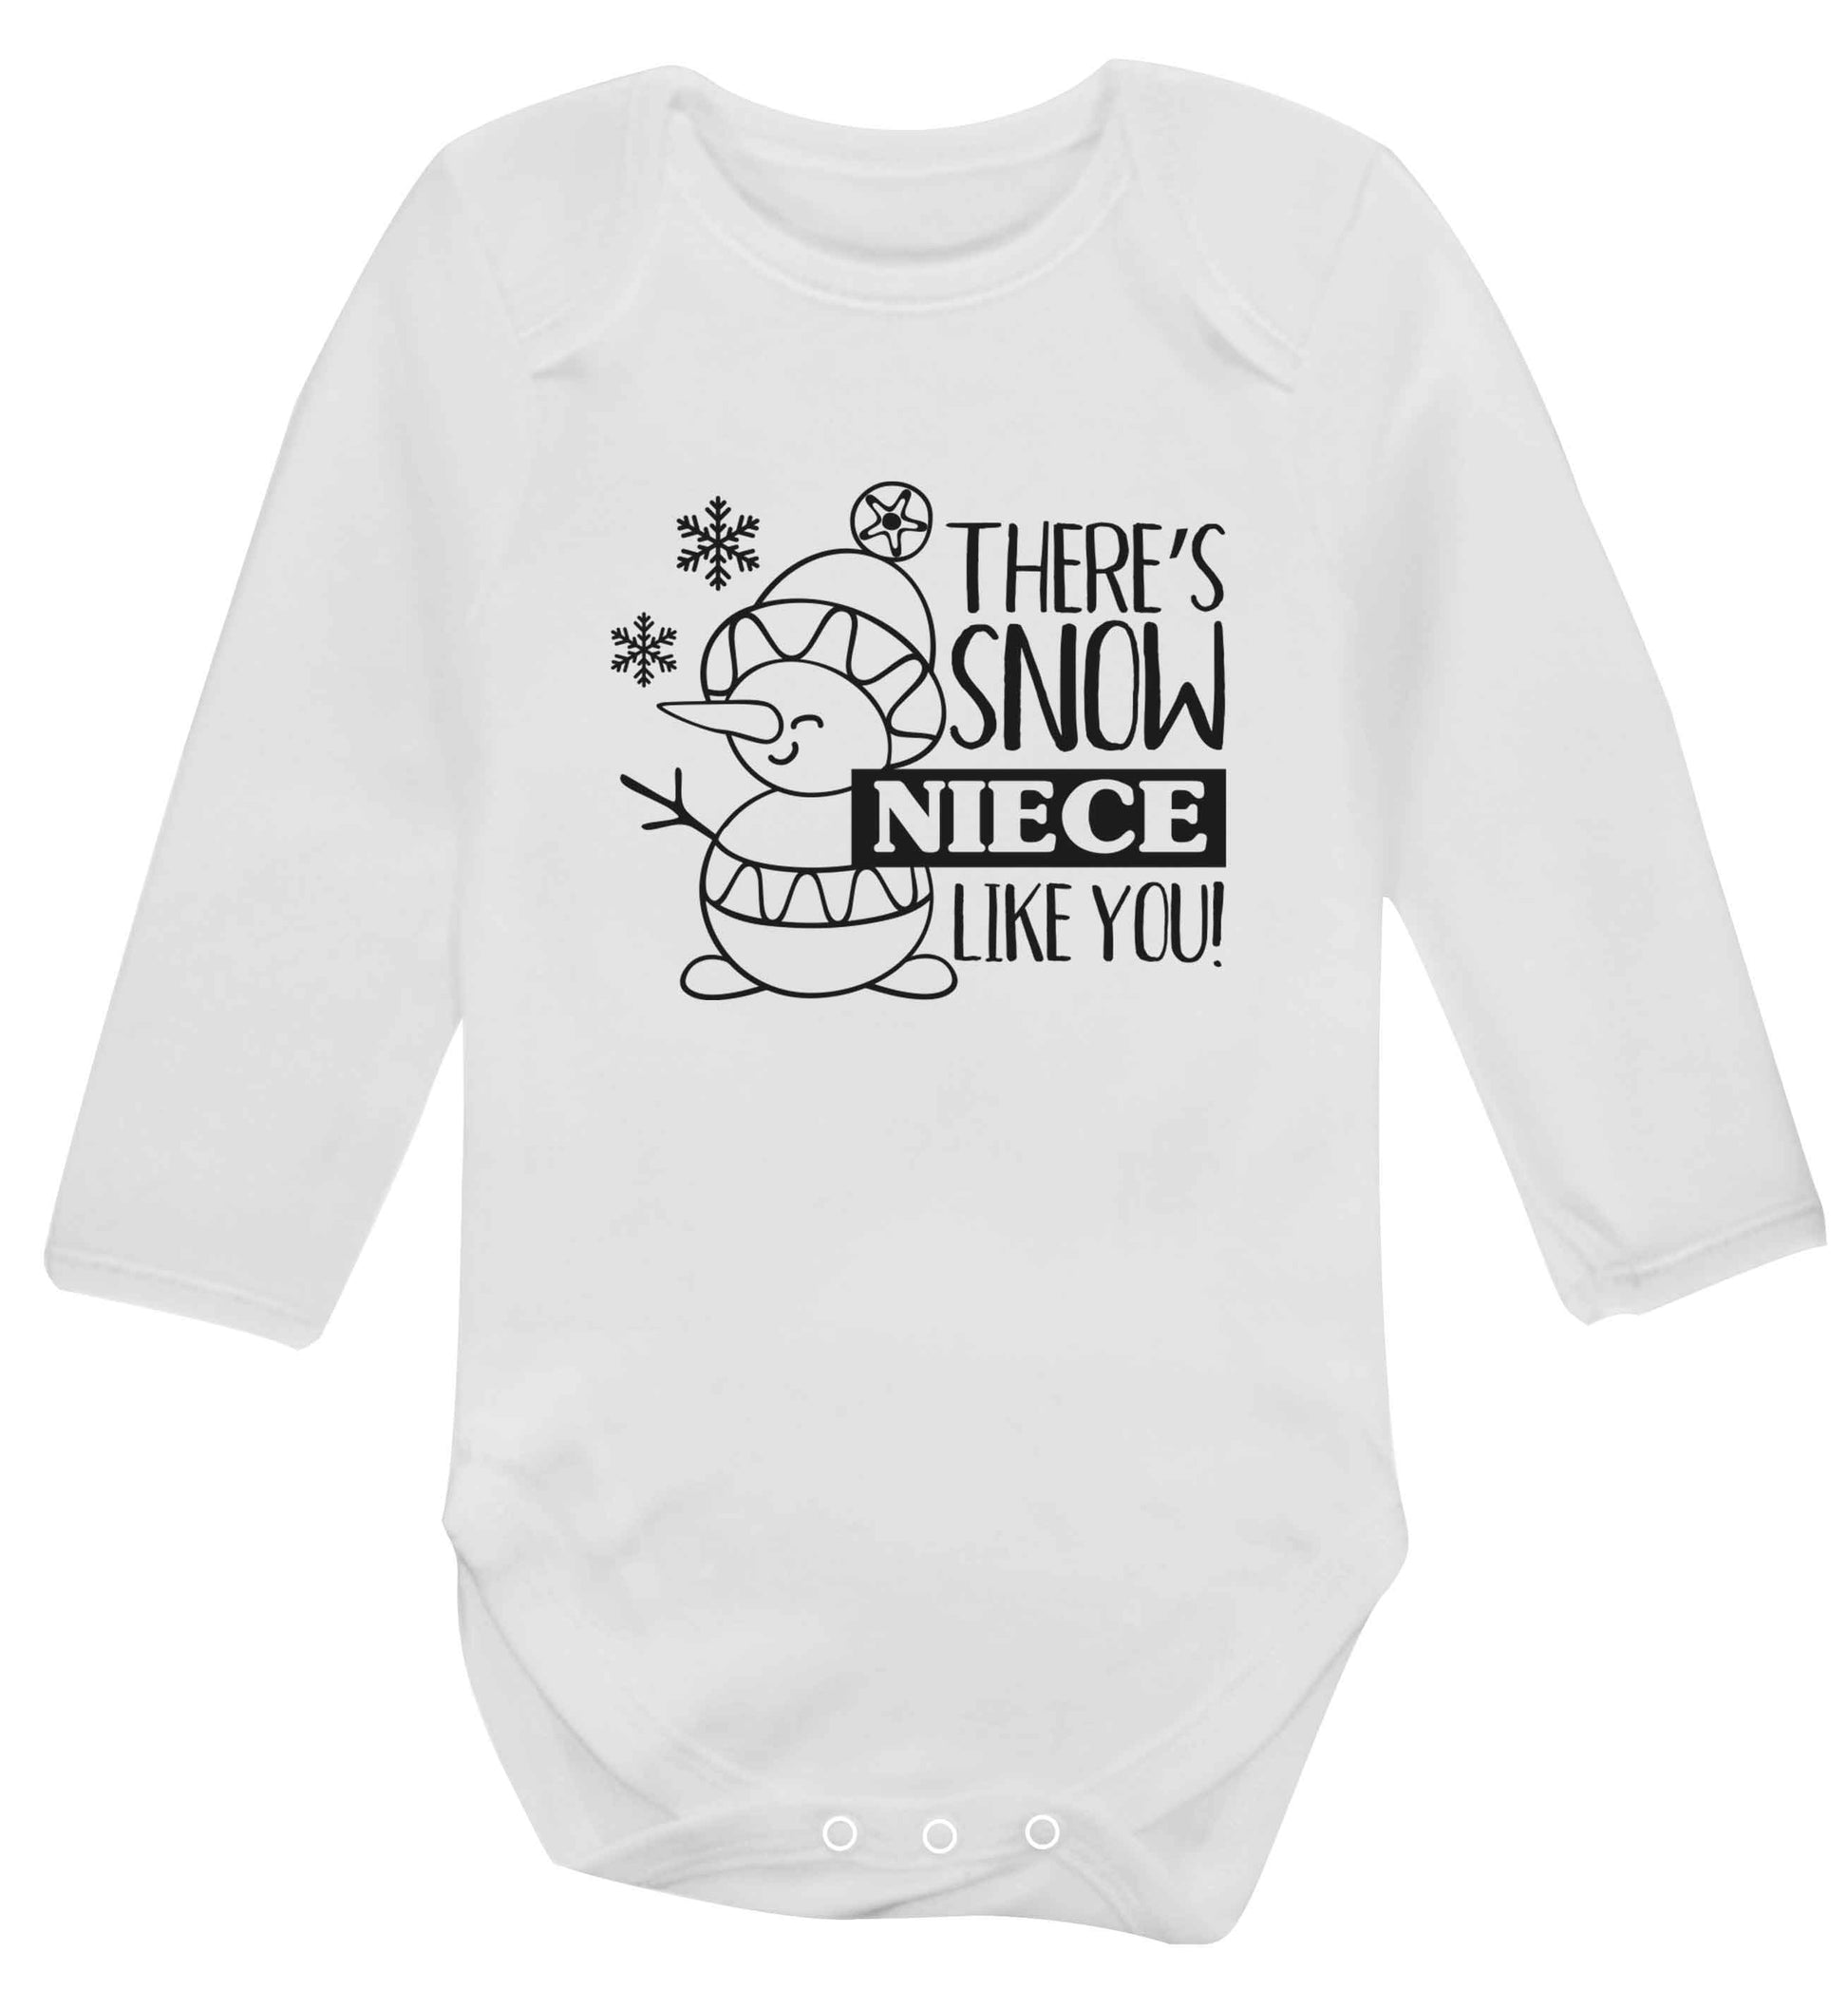 There's snow niece like you baby vest long sleeved white 6-12 months